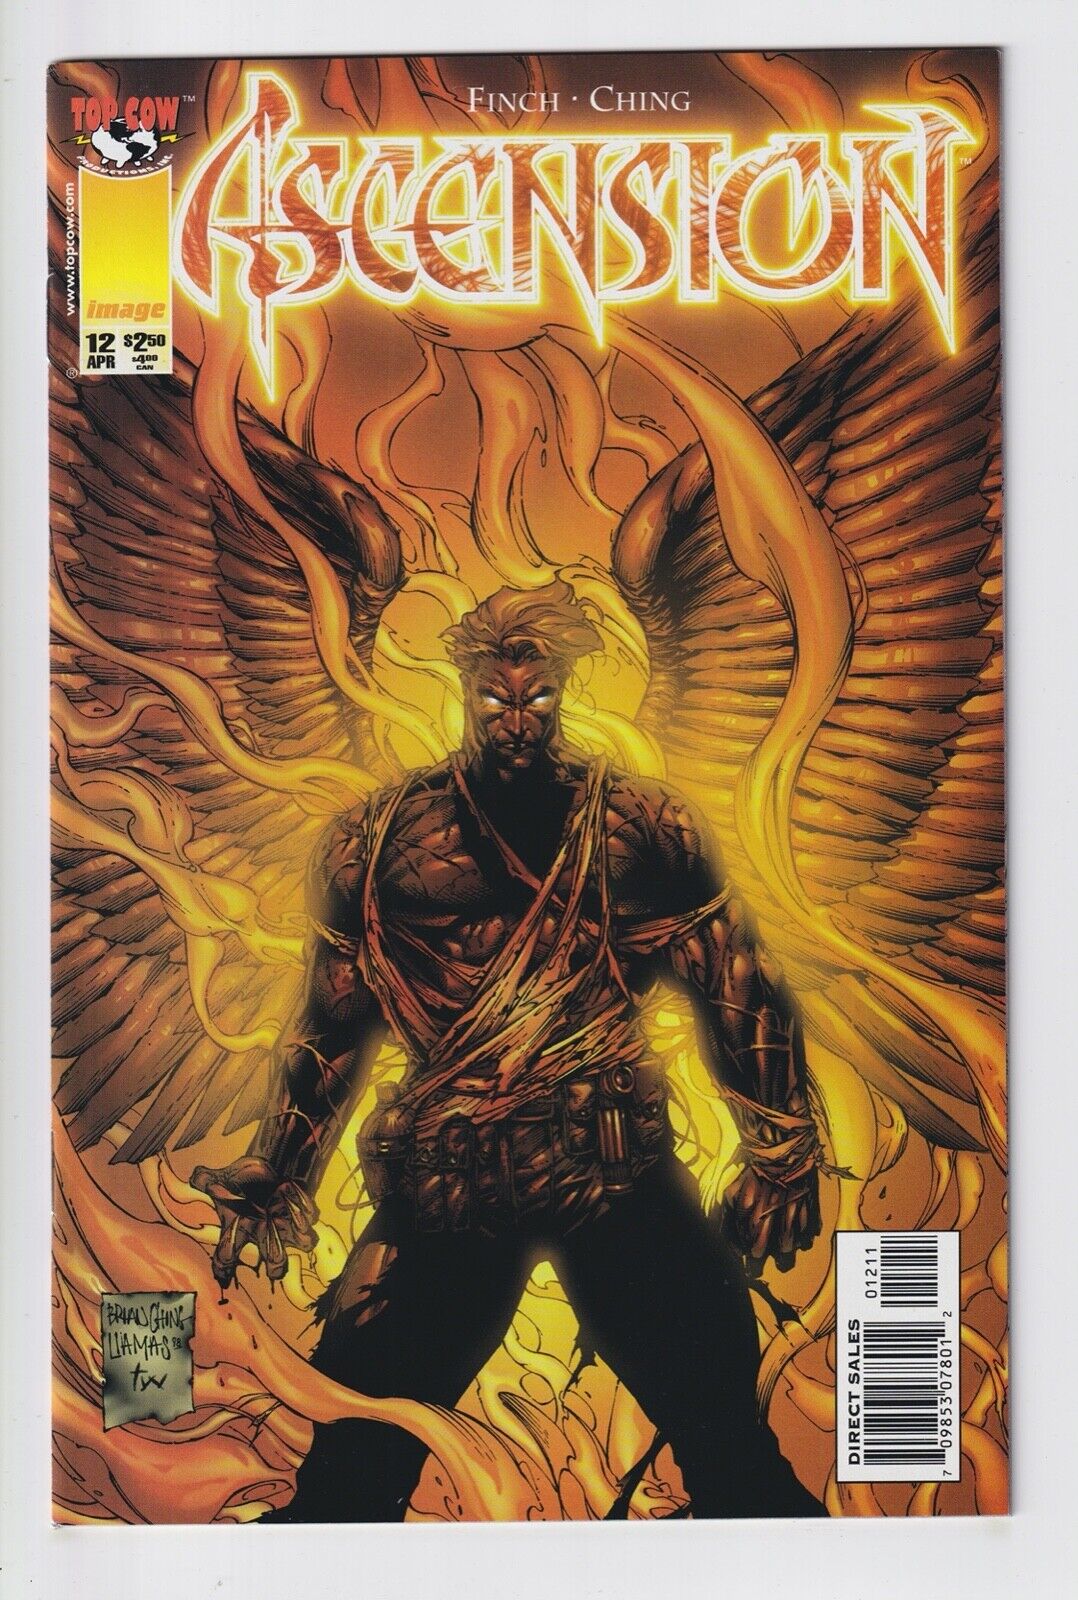 CLEARANCE BIN: TOP COW ASCENSION VG Finch IMAGE comics sold SEPARATELY 1212